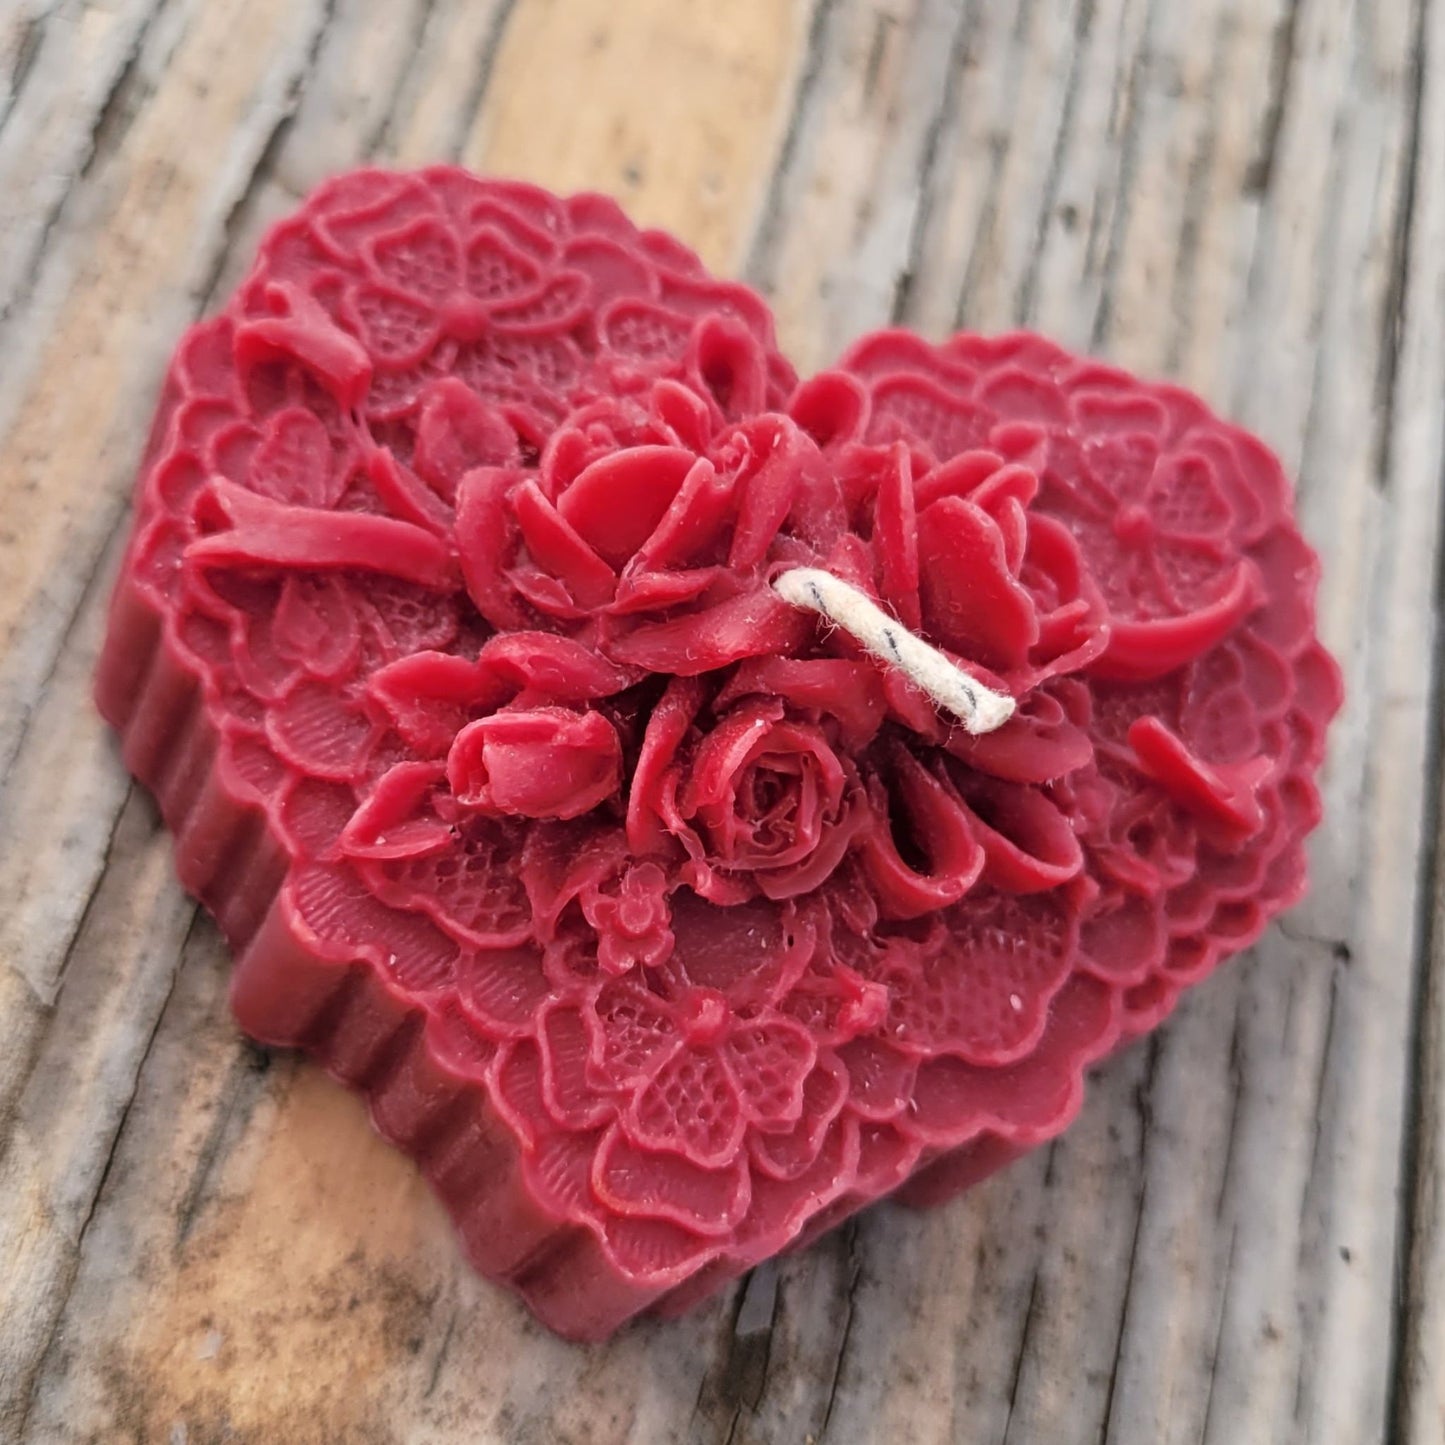 A handmade heart candle with roses in dark red.